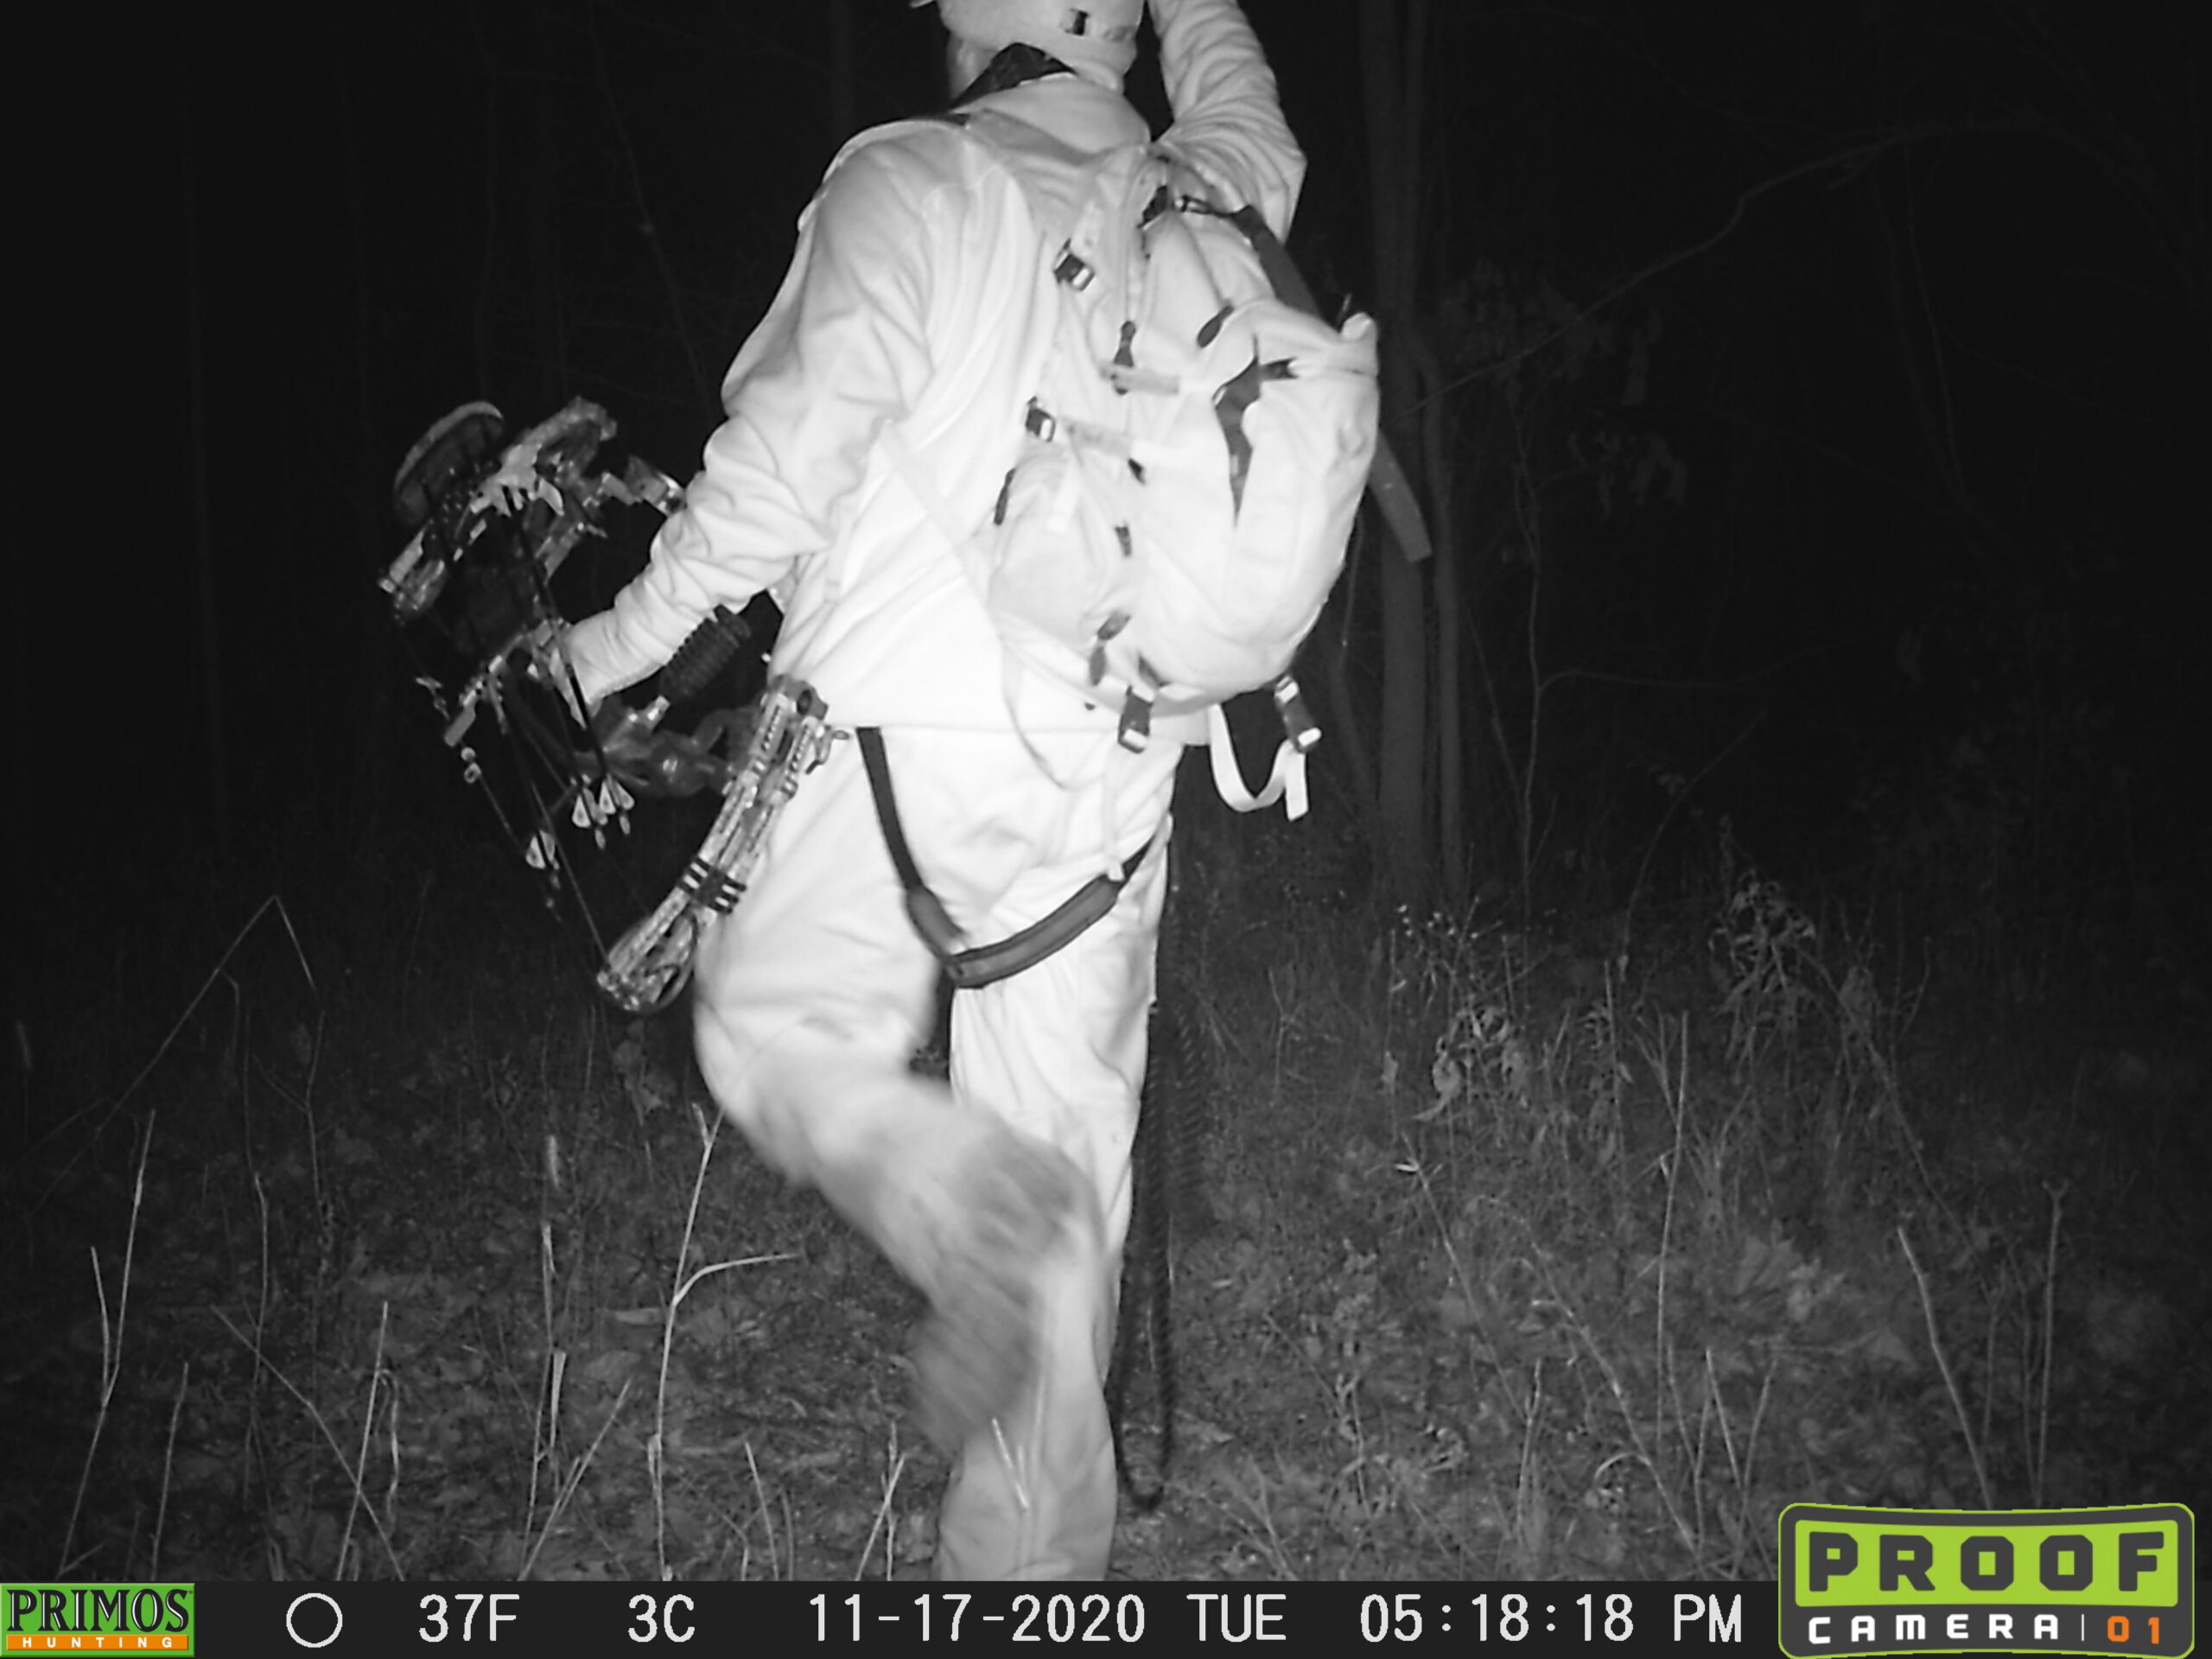 A hunter with a safety harness and a bow caught on trail camera after dark.